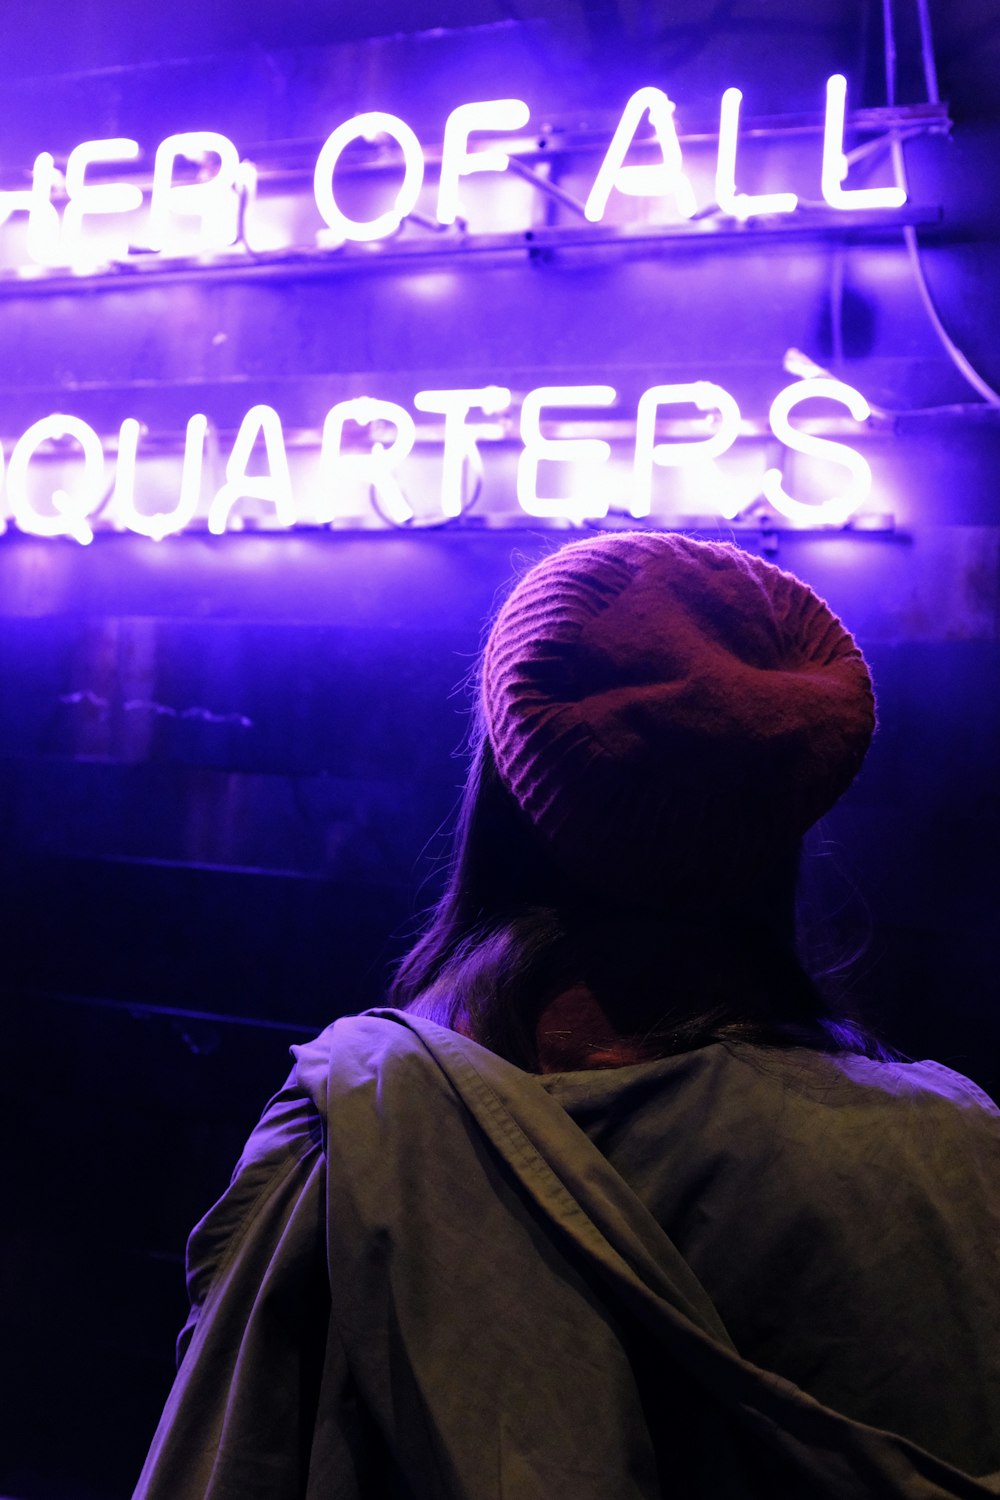 person wearing maroon knit cap in front of neon light signage